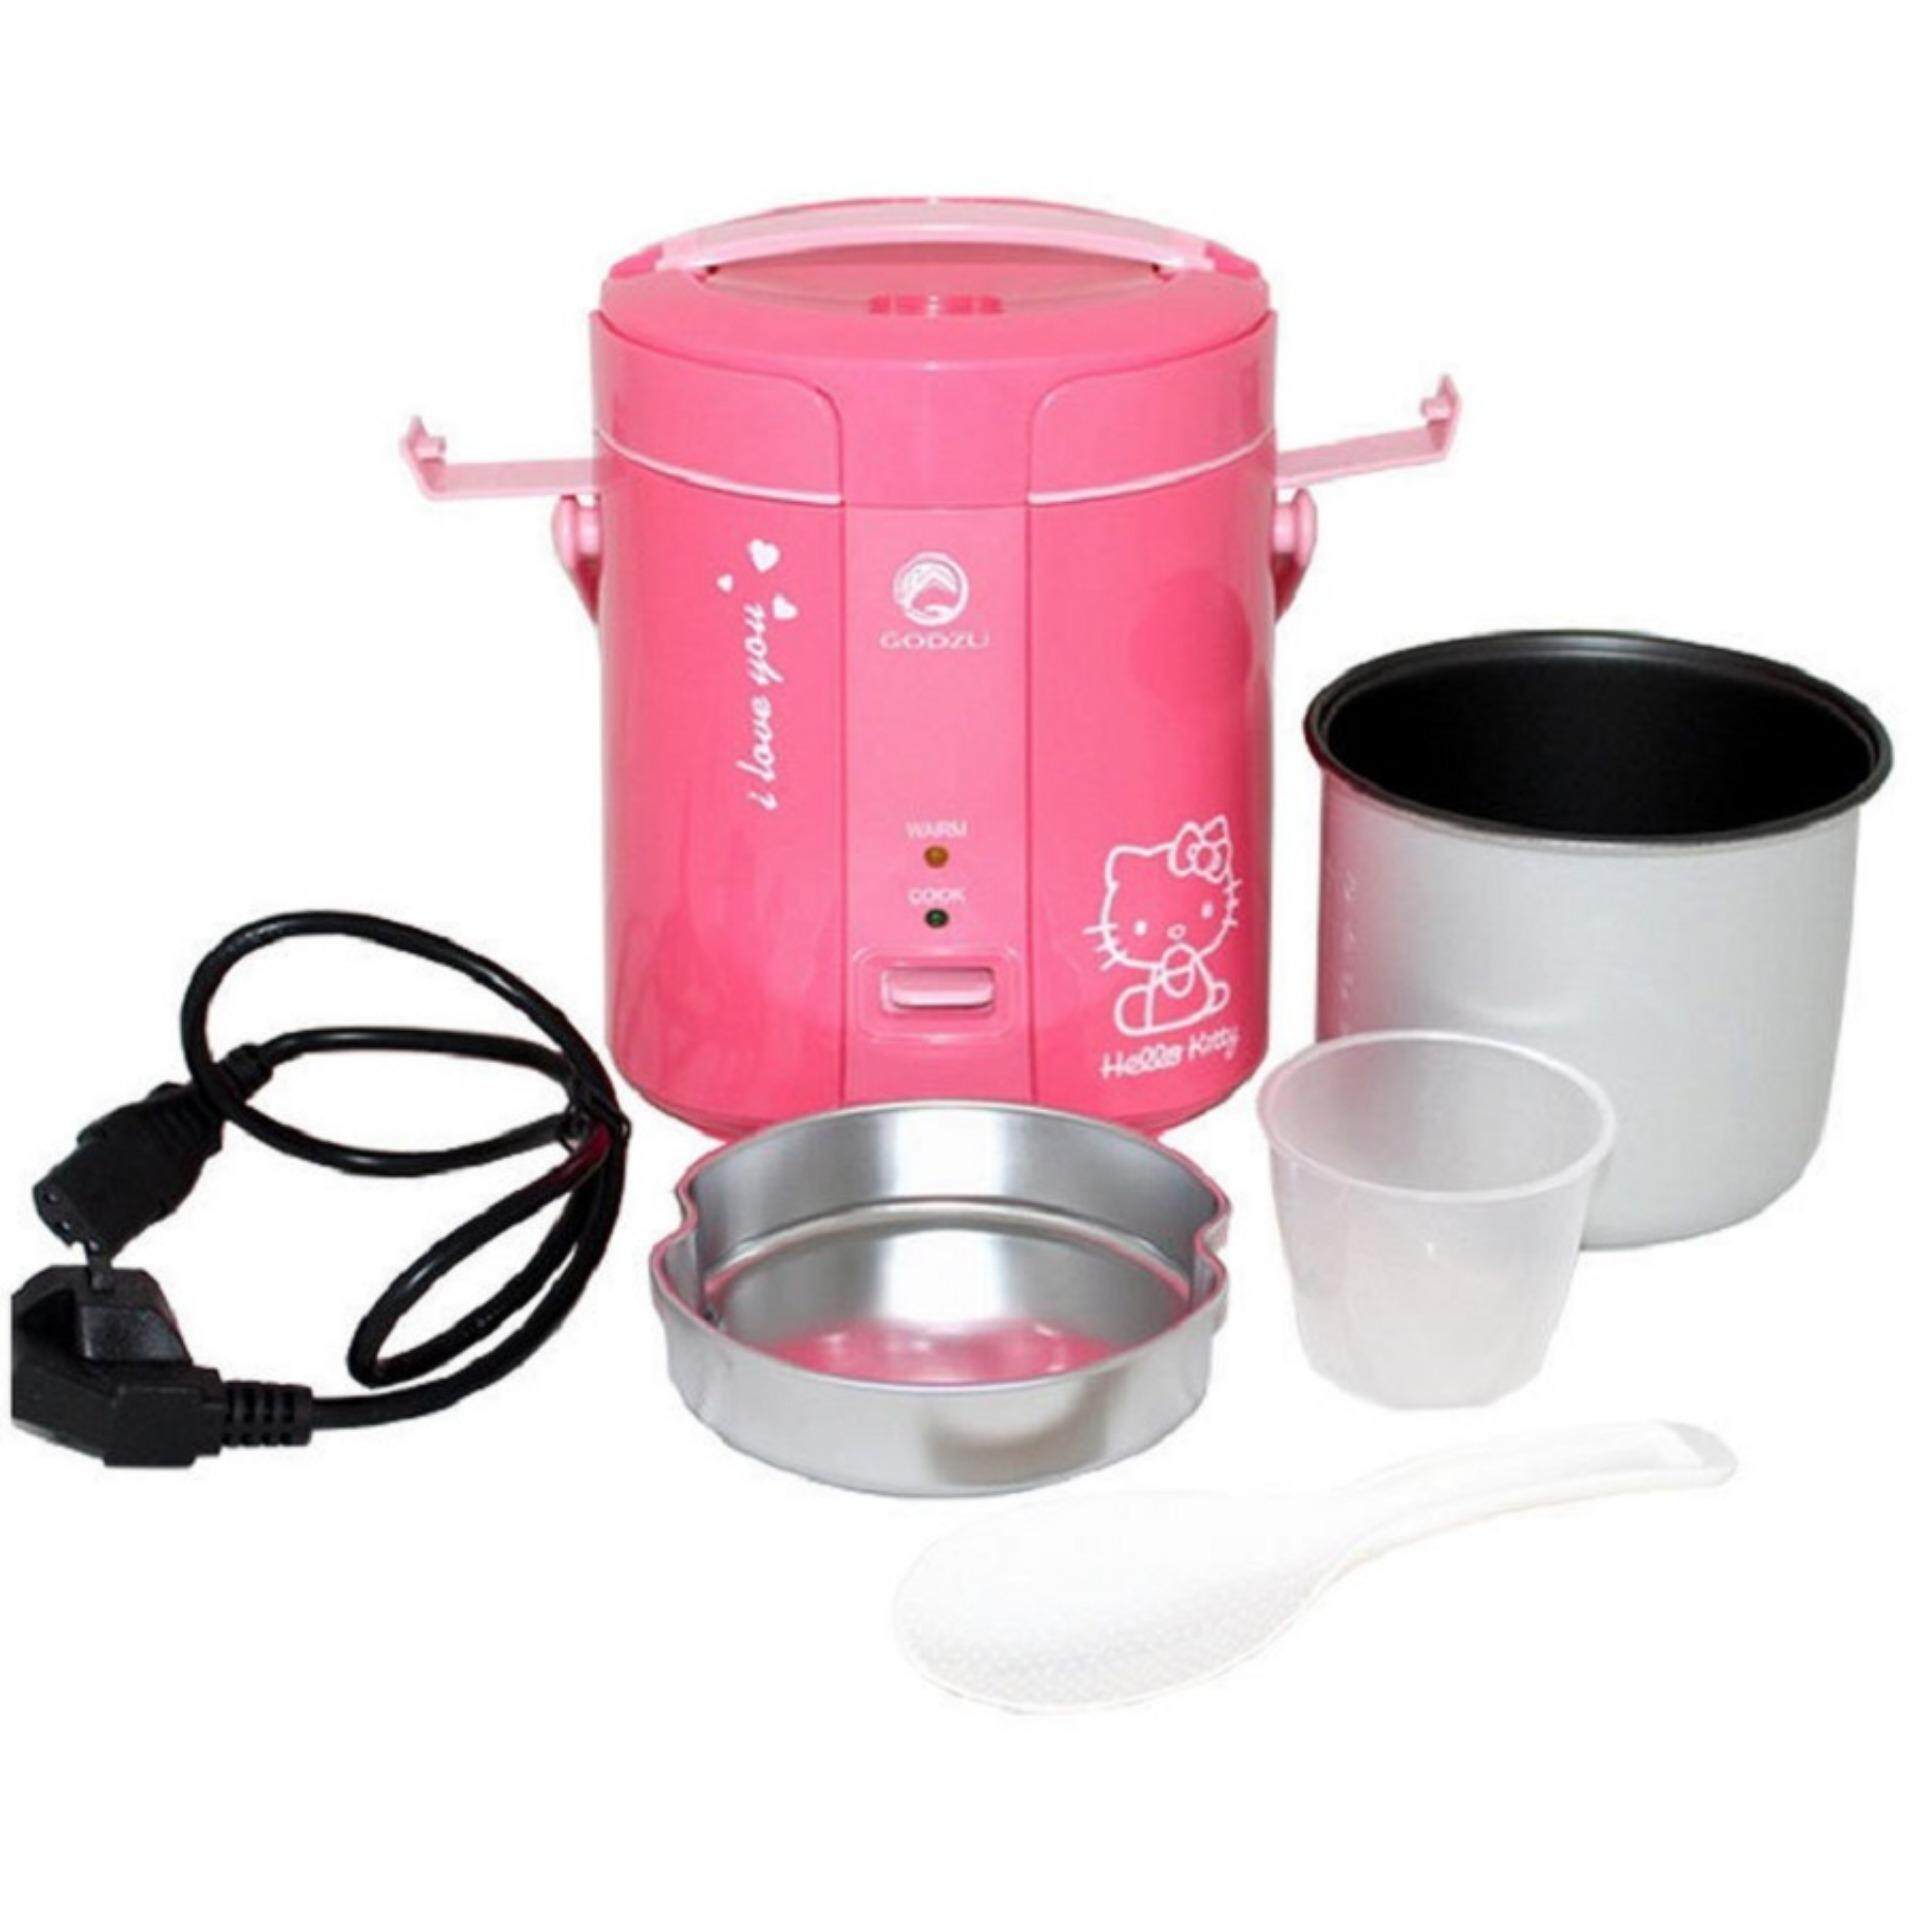 Portable 1.2L Mini Rice Cooker Stainless Steel Container-Pink Mini Stainless Steel Rice Cooker